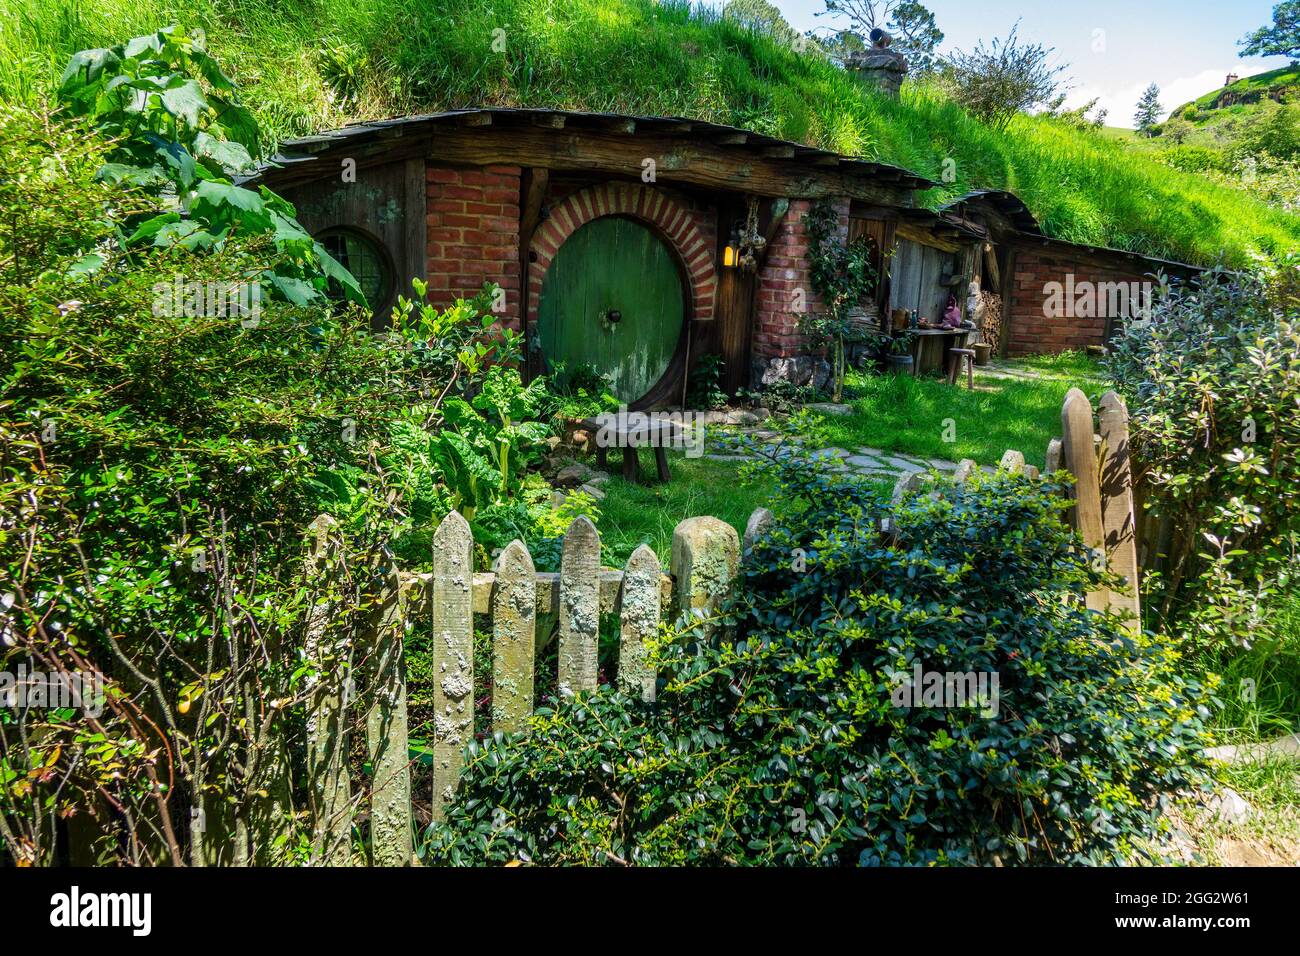 Green Door Hobbit Hole Home On The Hobbiton Movie Set For The Lord Of The Rings Movie Trilogy In Matamata New Zealand A Popular Tourist Attraction Stock Photo